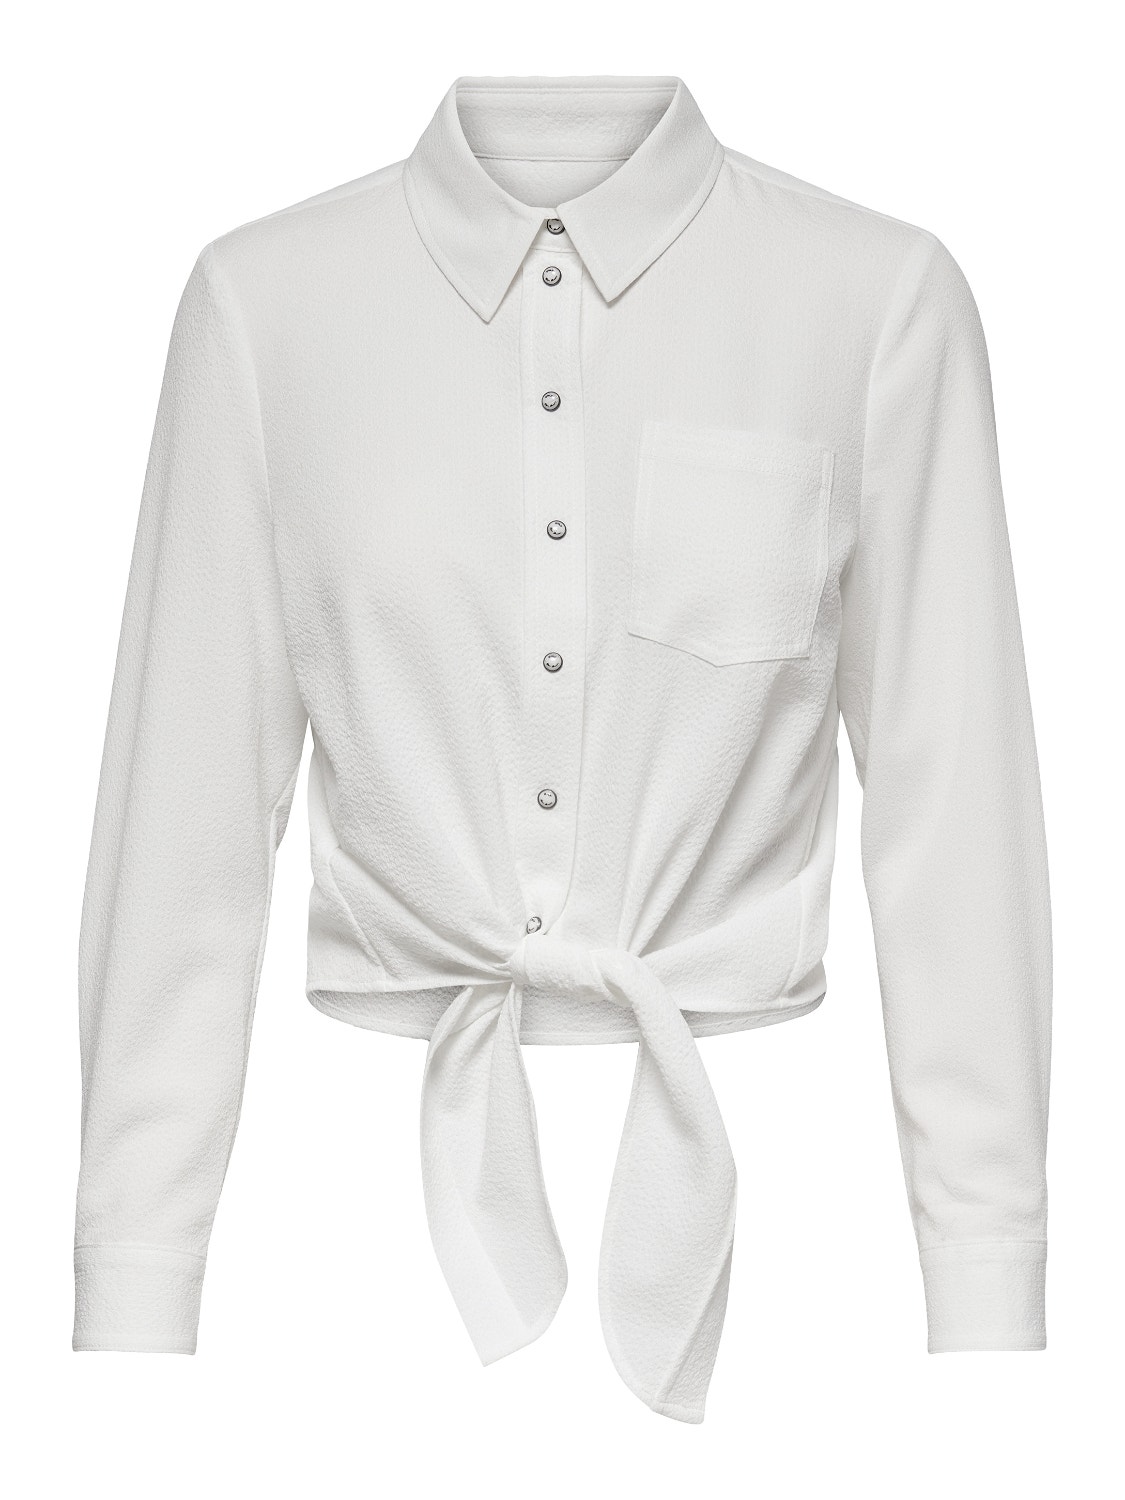 Tie White detail | ONLY® Shirt |